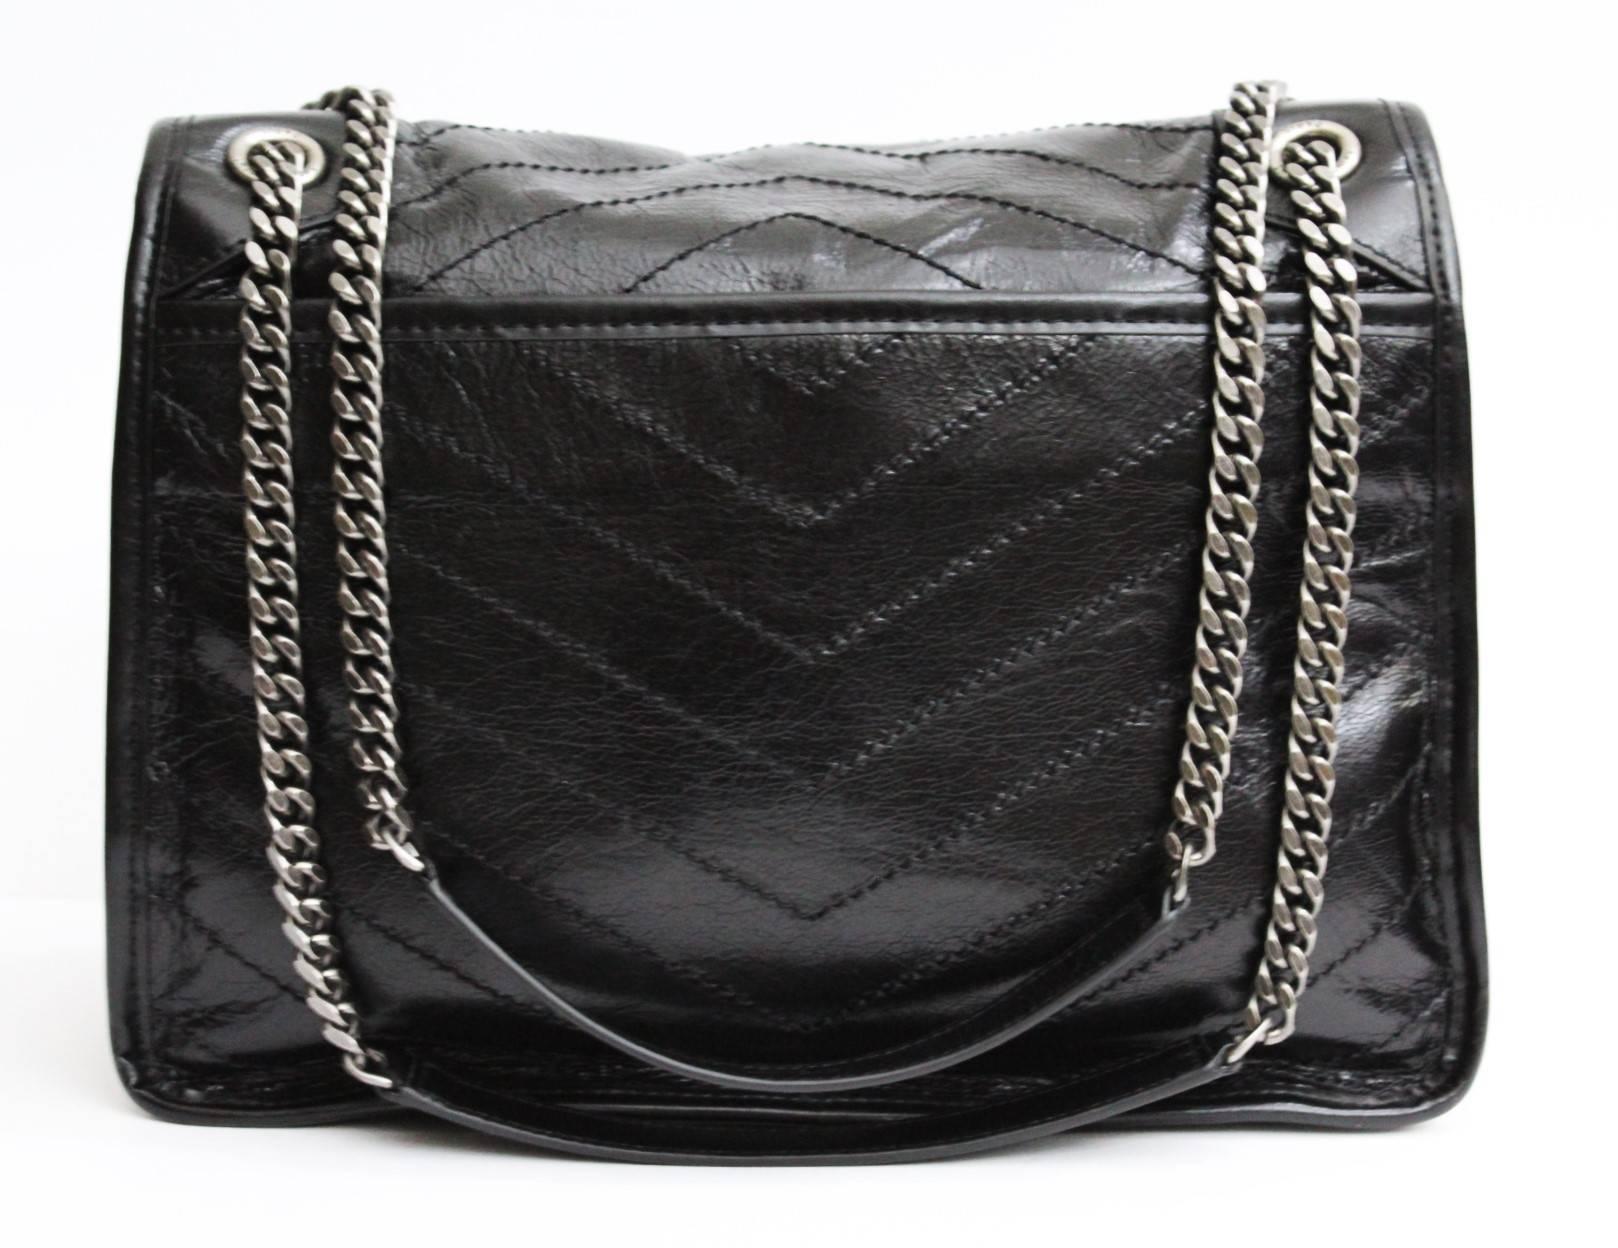 
YSL niki bag in the large size . It is made of black calf leather. It has a double chain that can be carried in two ways, one shoulder or crossbody . Excellent bag also for everyday thanks to its comfort, in fact it has a large central pocket, a